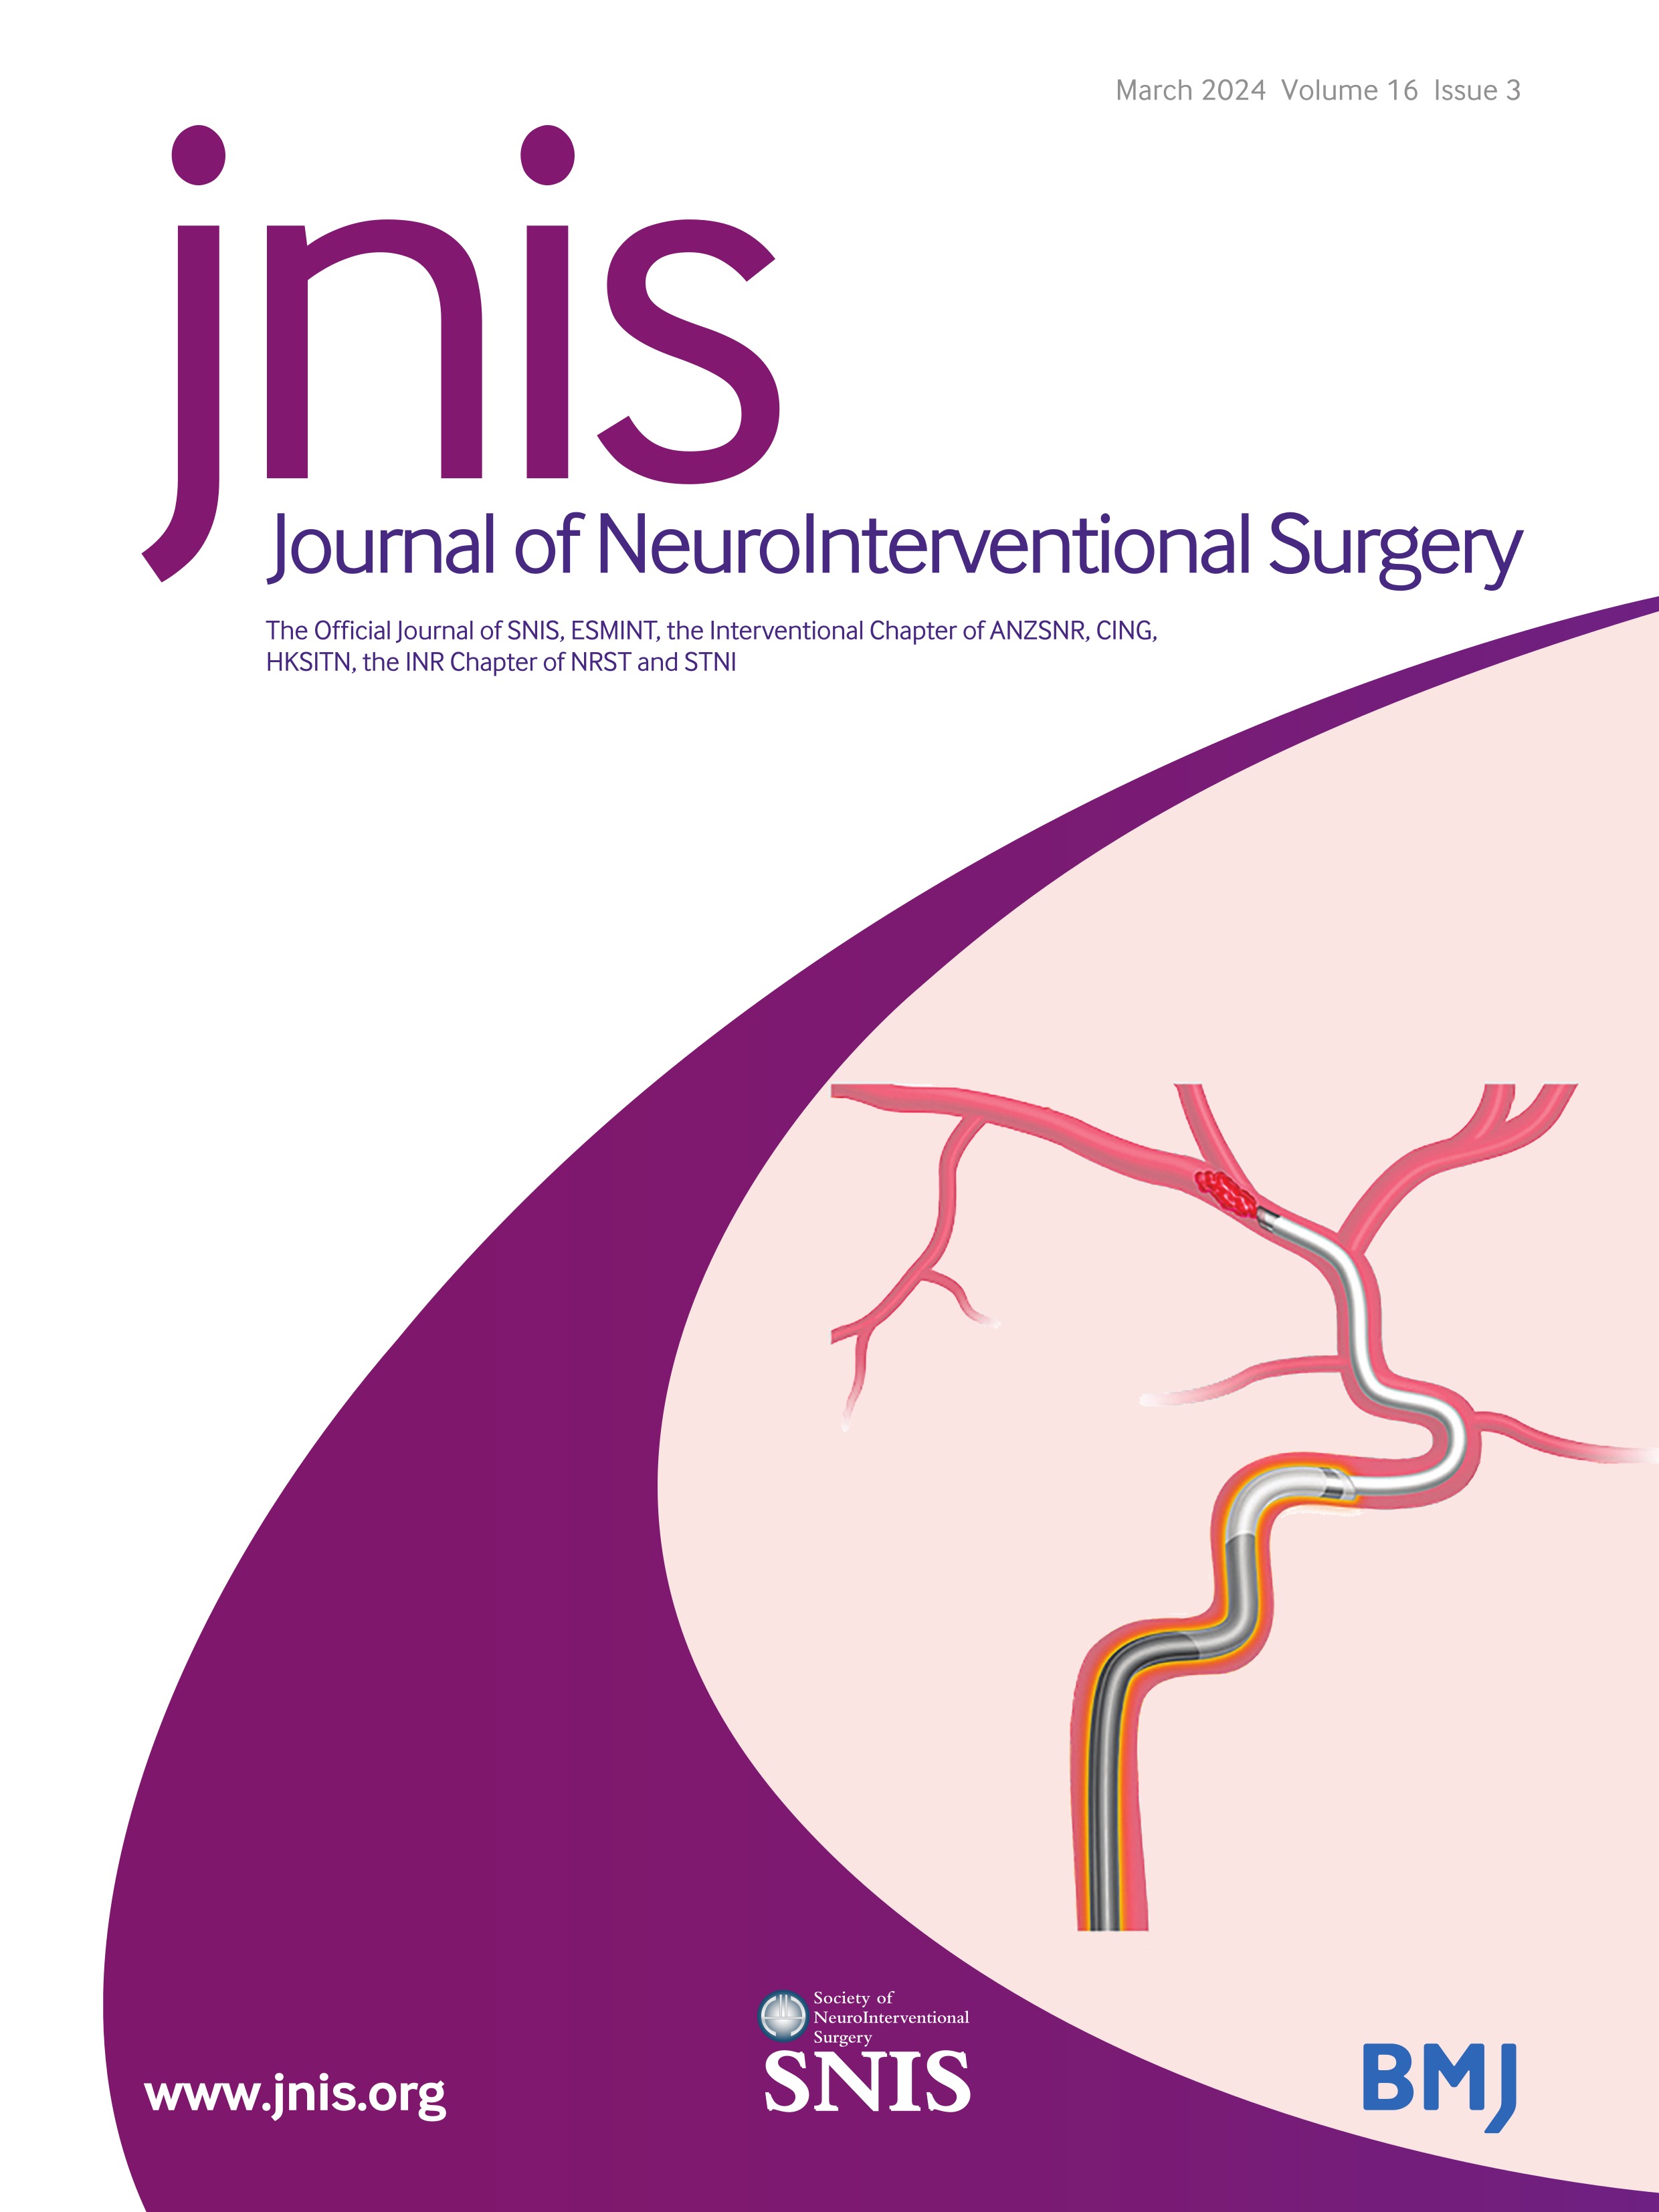 WEB for recurrent aneurysms: a case series to review technical nuances